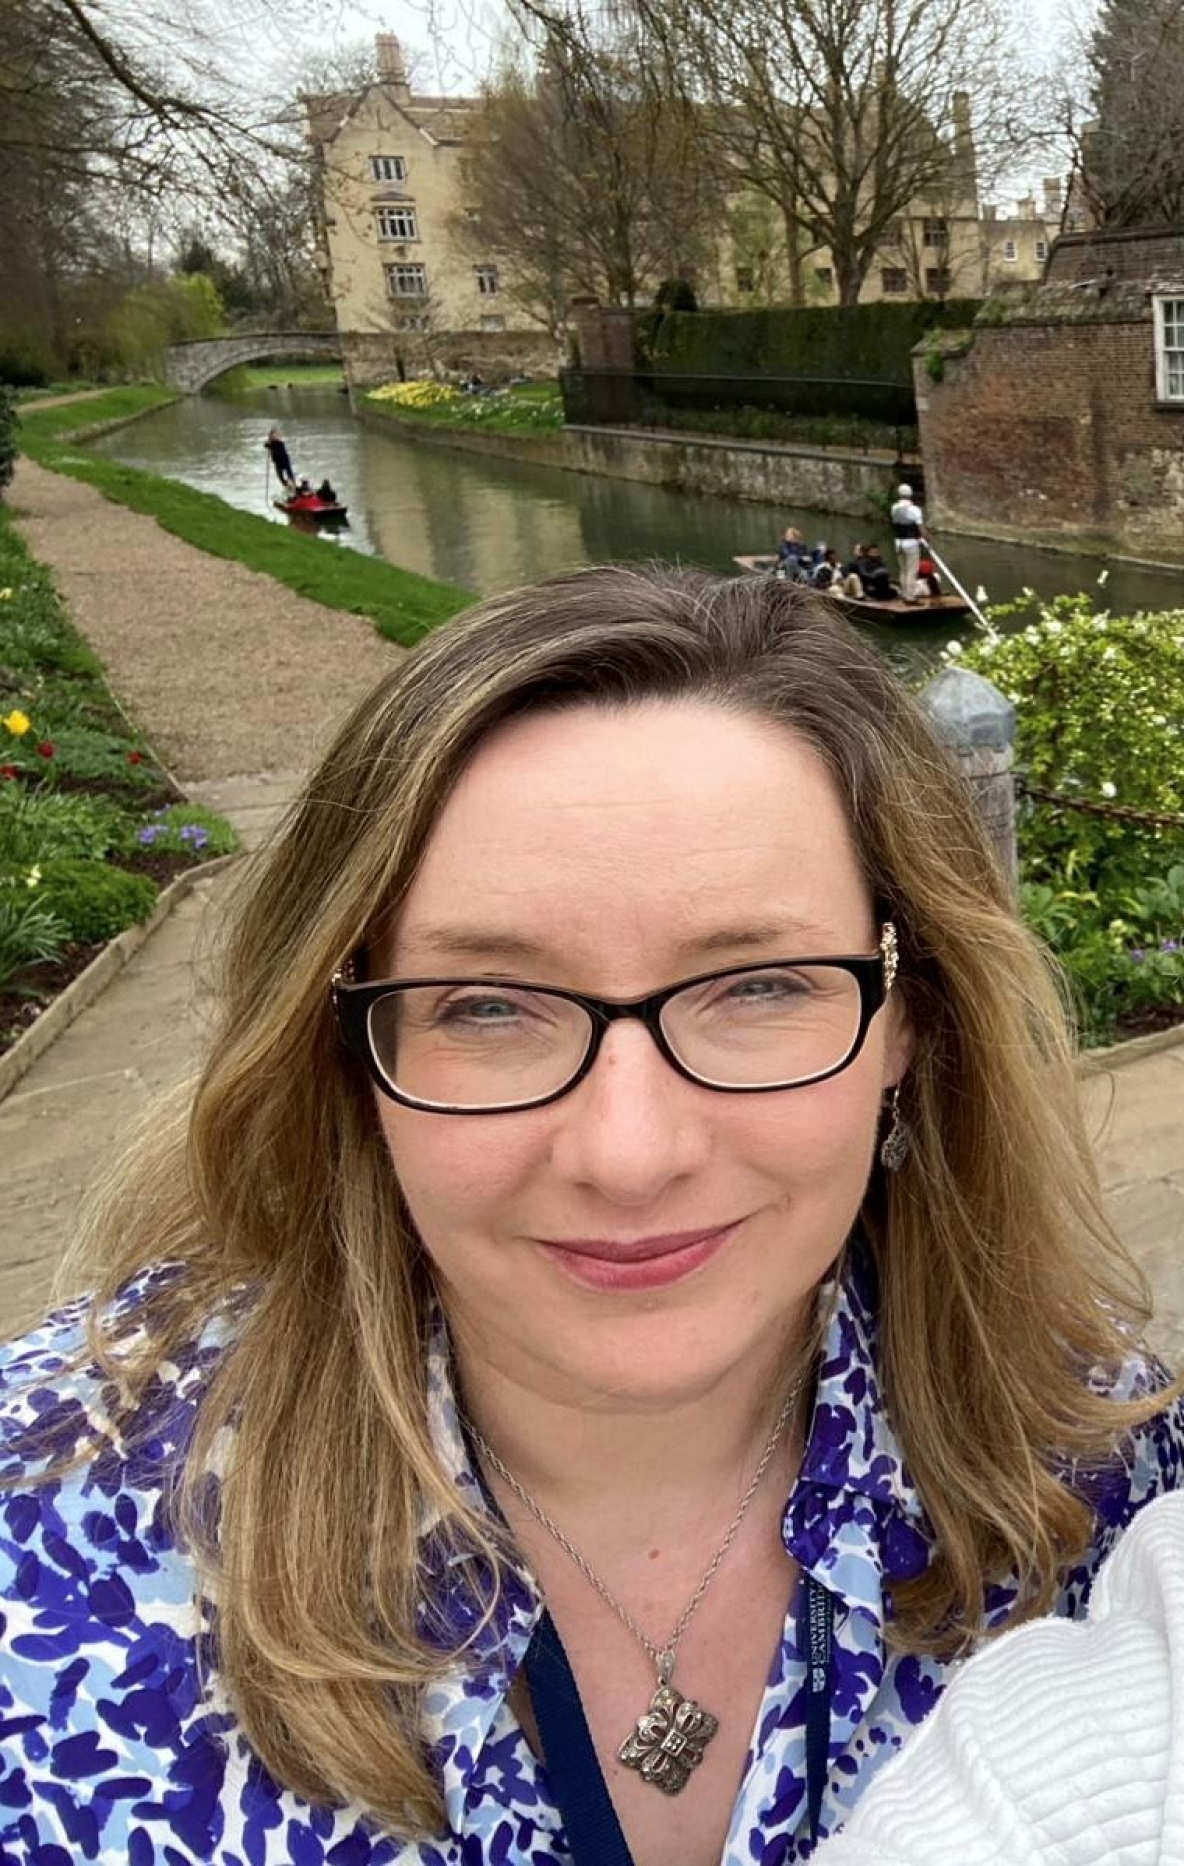 Dr Una Woods in front of the canal in Cambridge University.